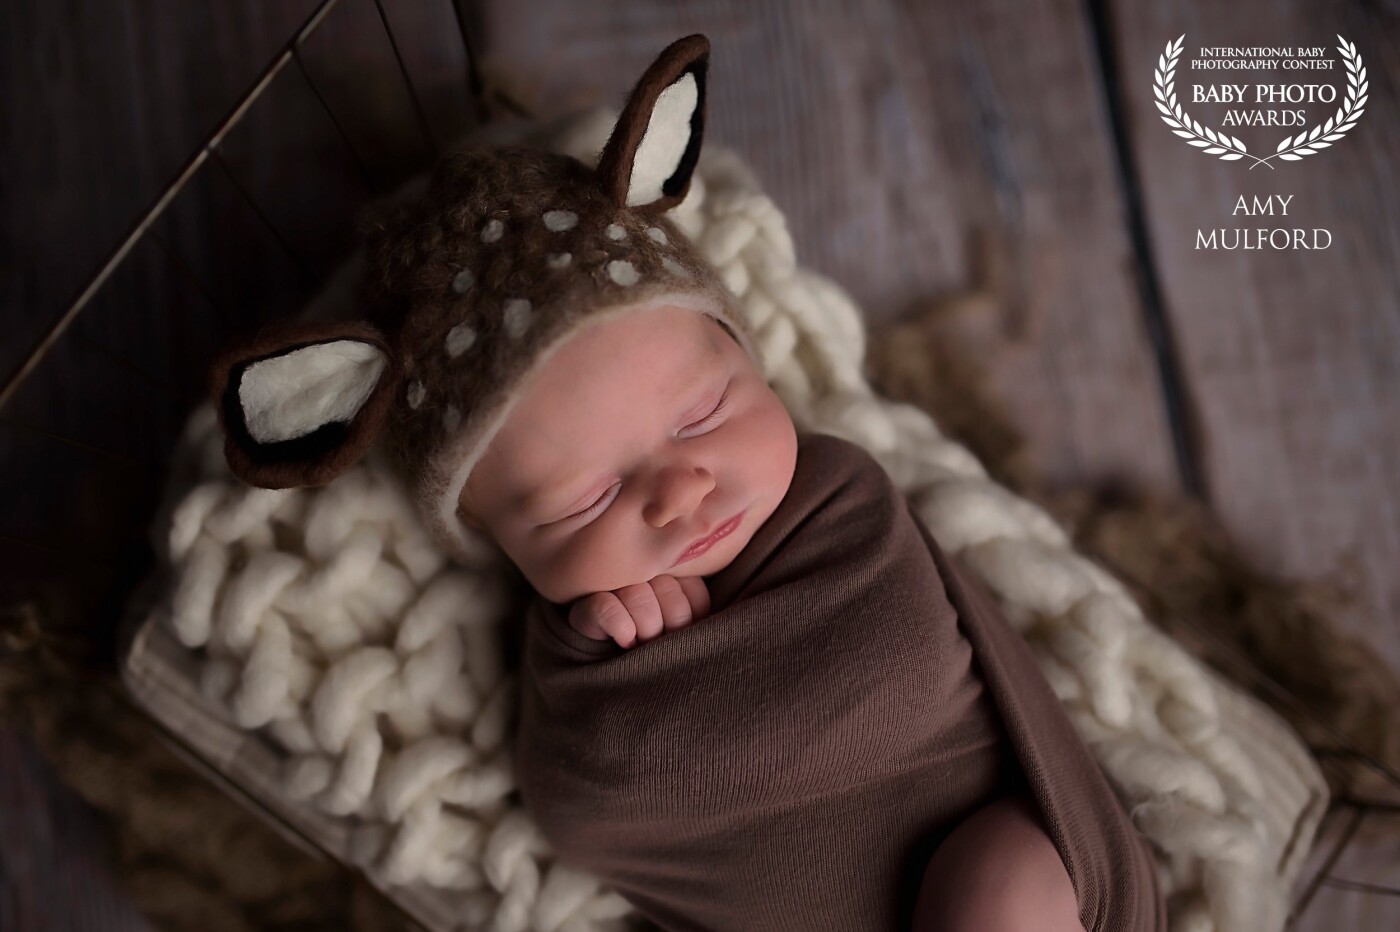 This little guy had to come to my studio twice! He was not a fan of getting his pictures taken, even on the second day. We ended up with a few good ones in the end. I think he really liked my deer bonnet!!